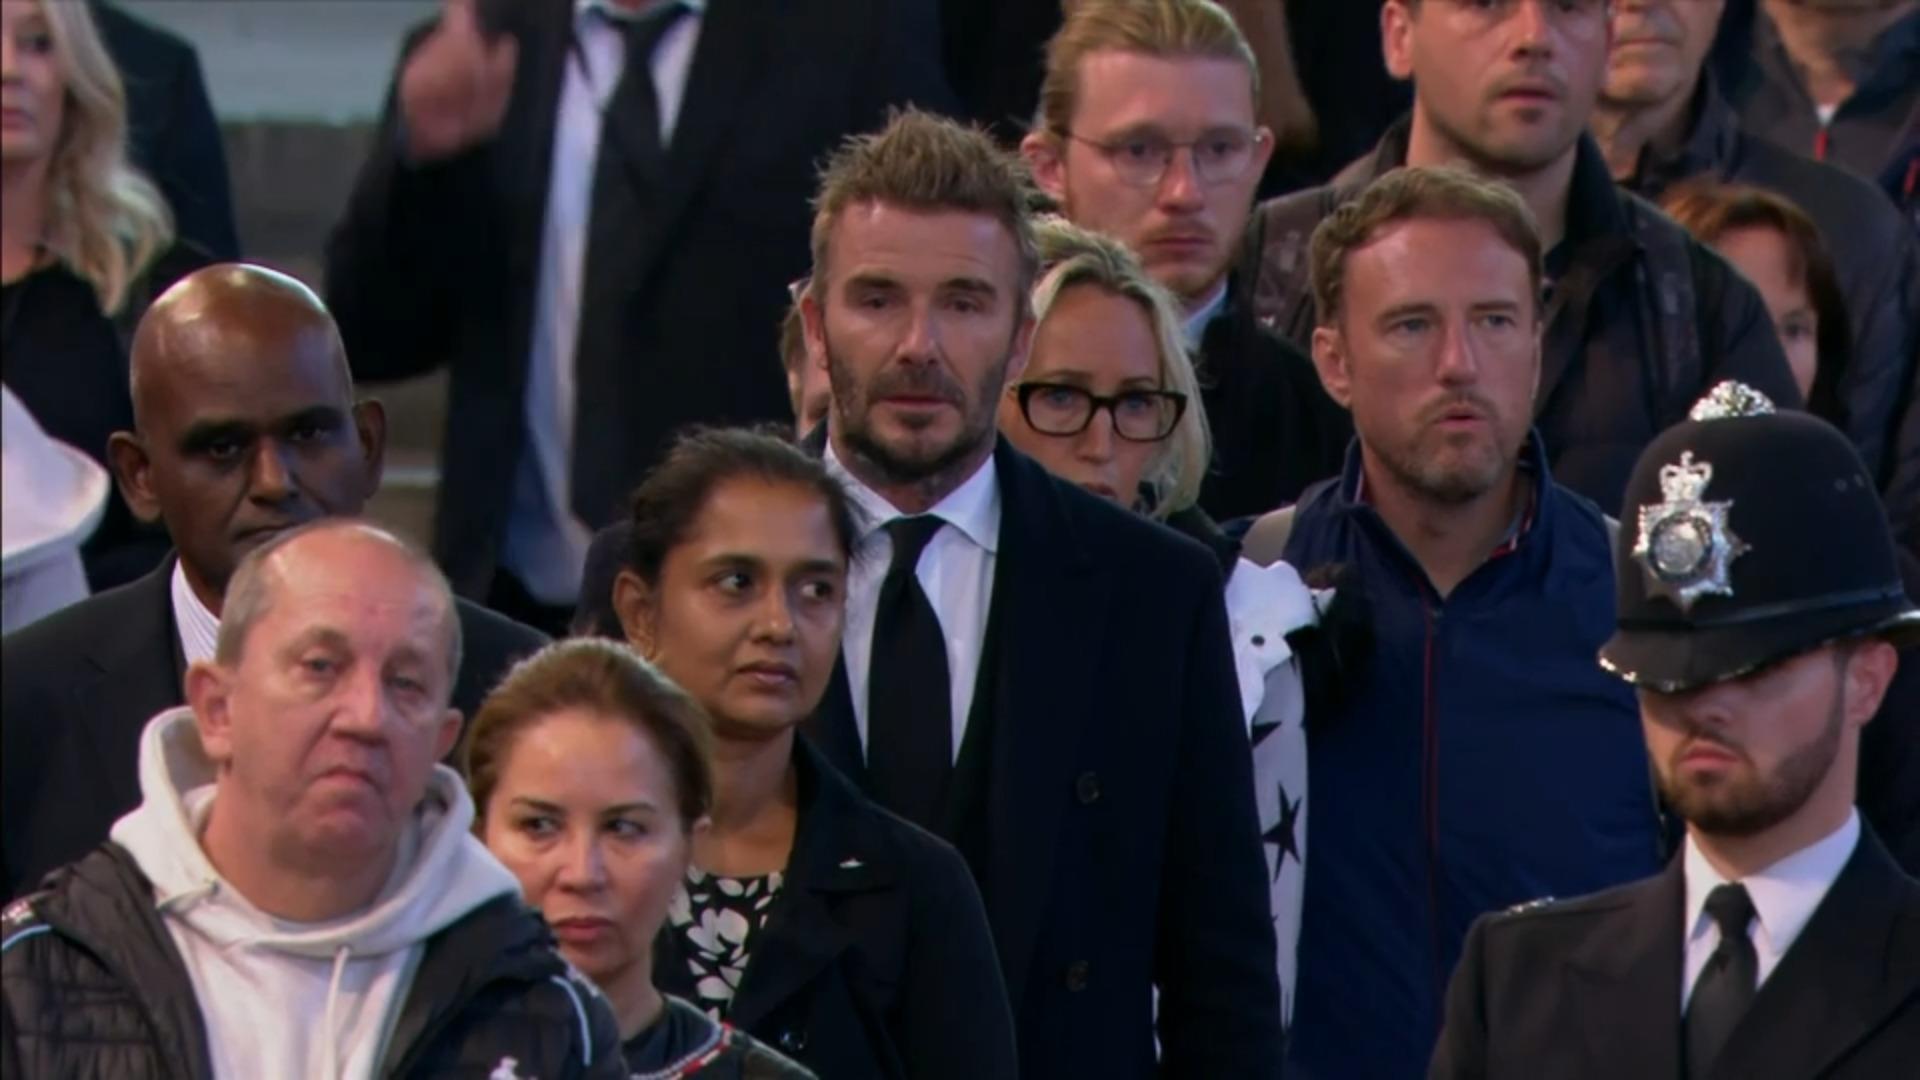 World football star David Beckham is waiting in front of the Queen's coffin. He has been waiting since 2 a.m